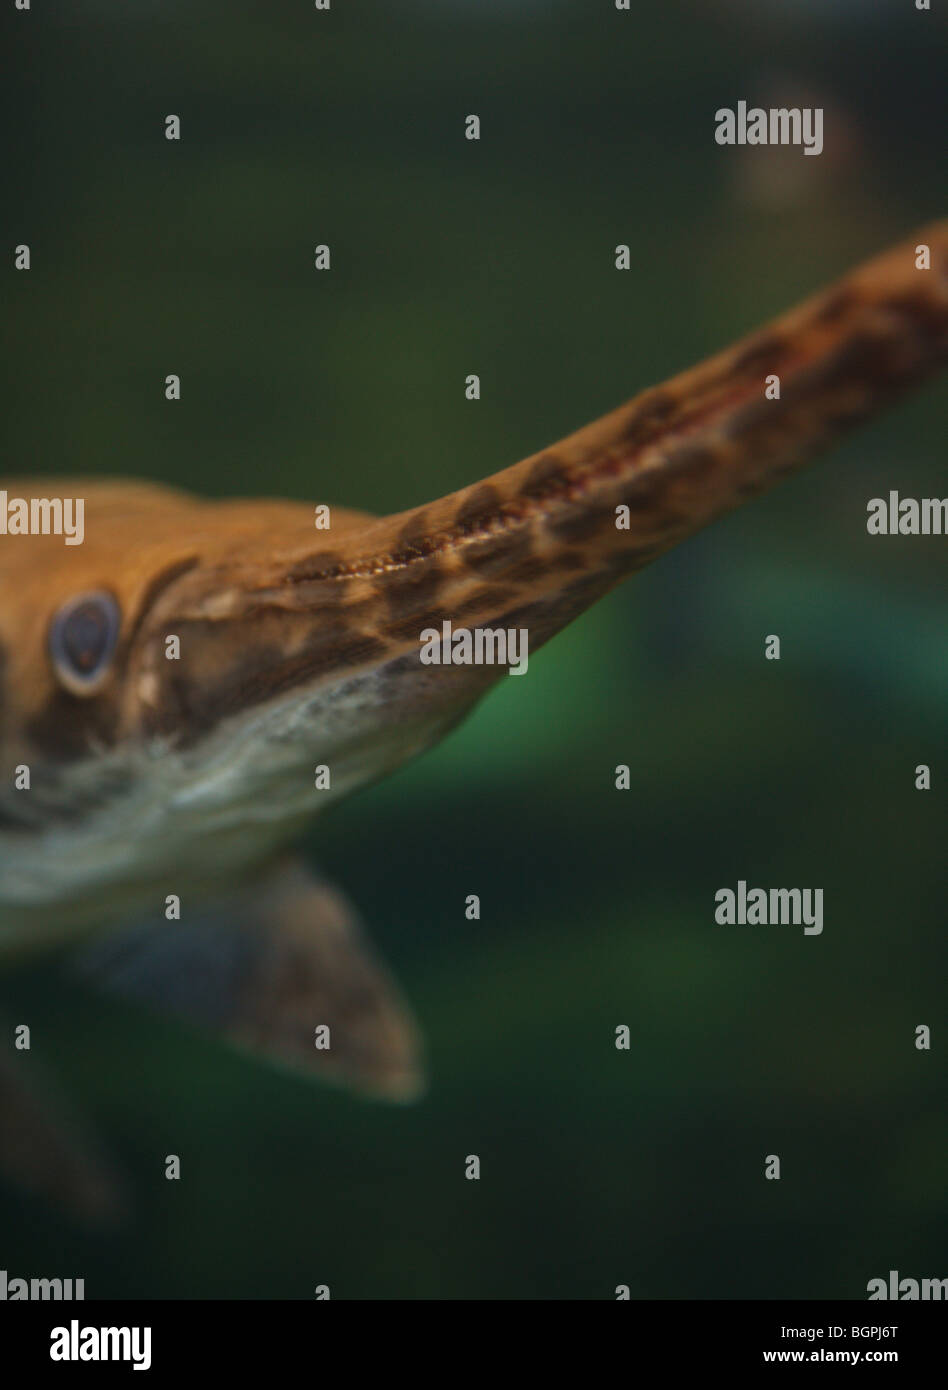 CLOSEUP ZOOM VIEW OF SPOTTED GAR SNOUT AND TEETH FISH HABITAT Stock Photo